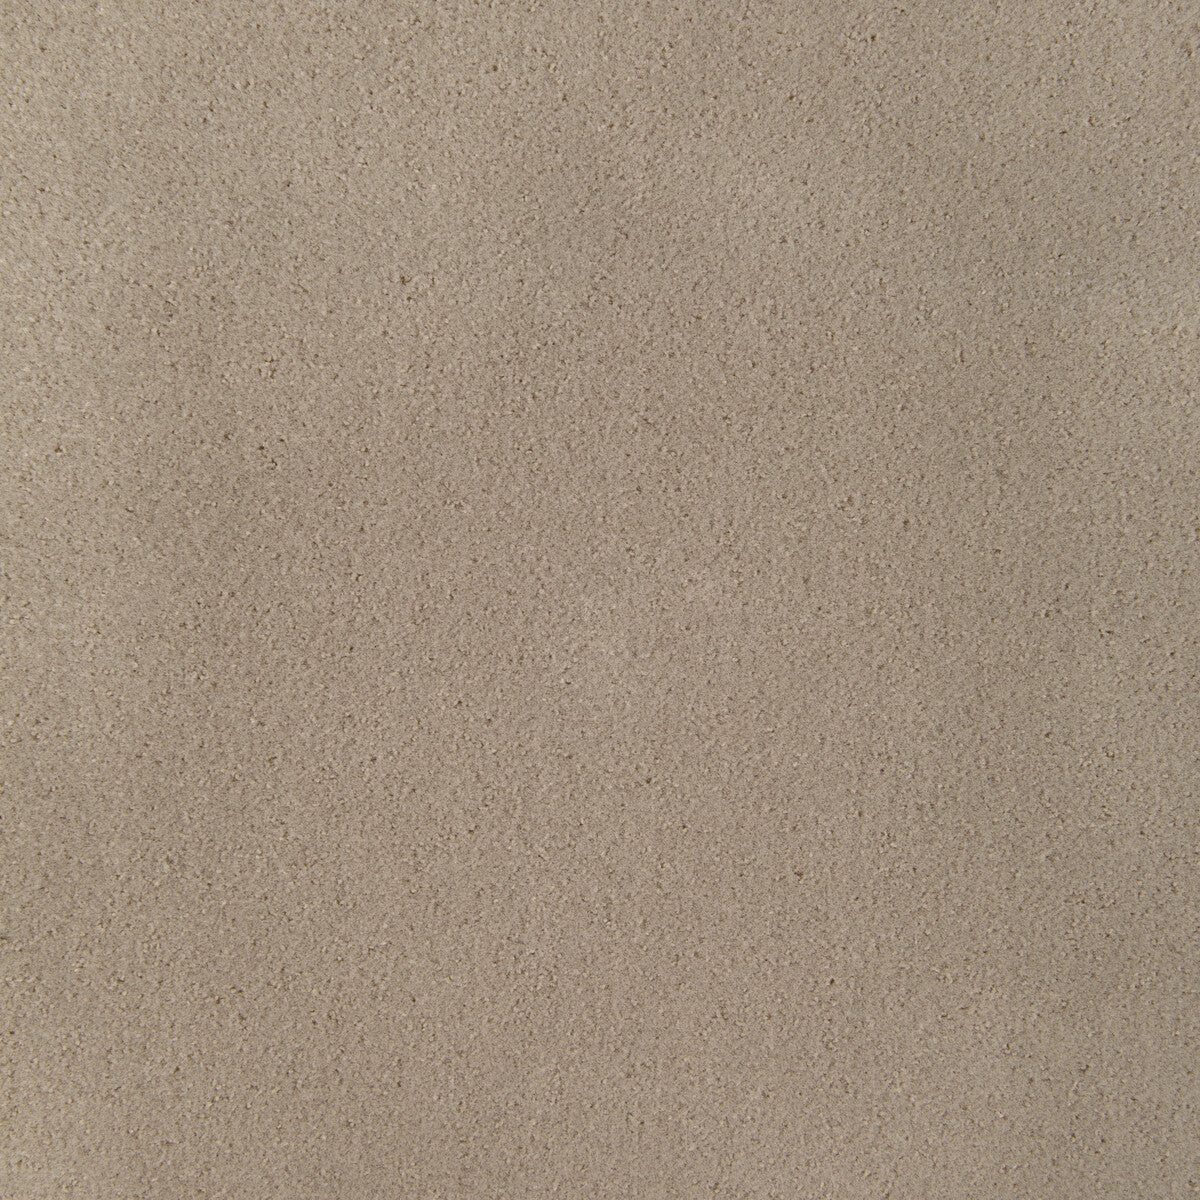 Fomo fabric in fawn color - pattern 36543.16.0 - by Kravet Contract